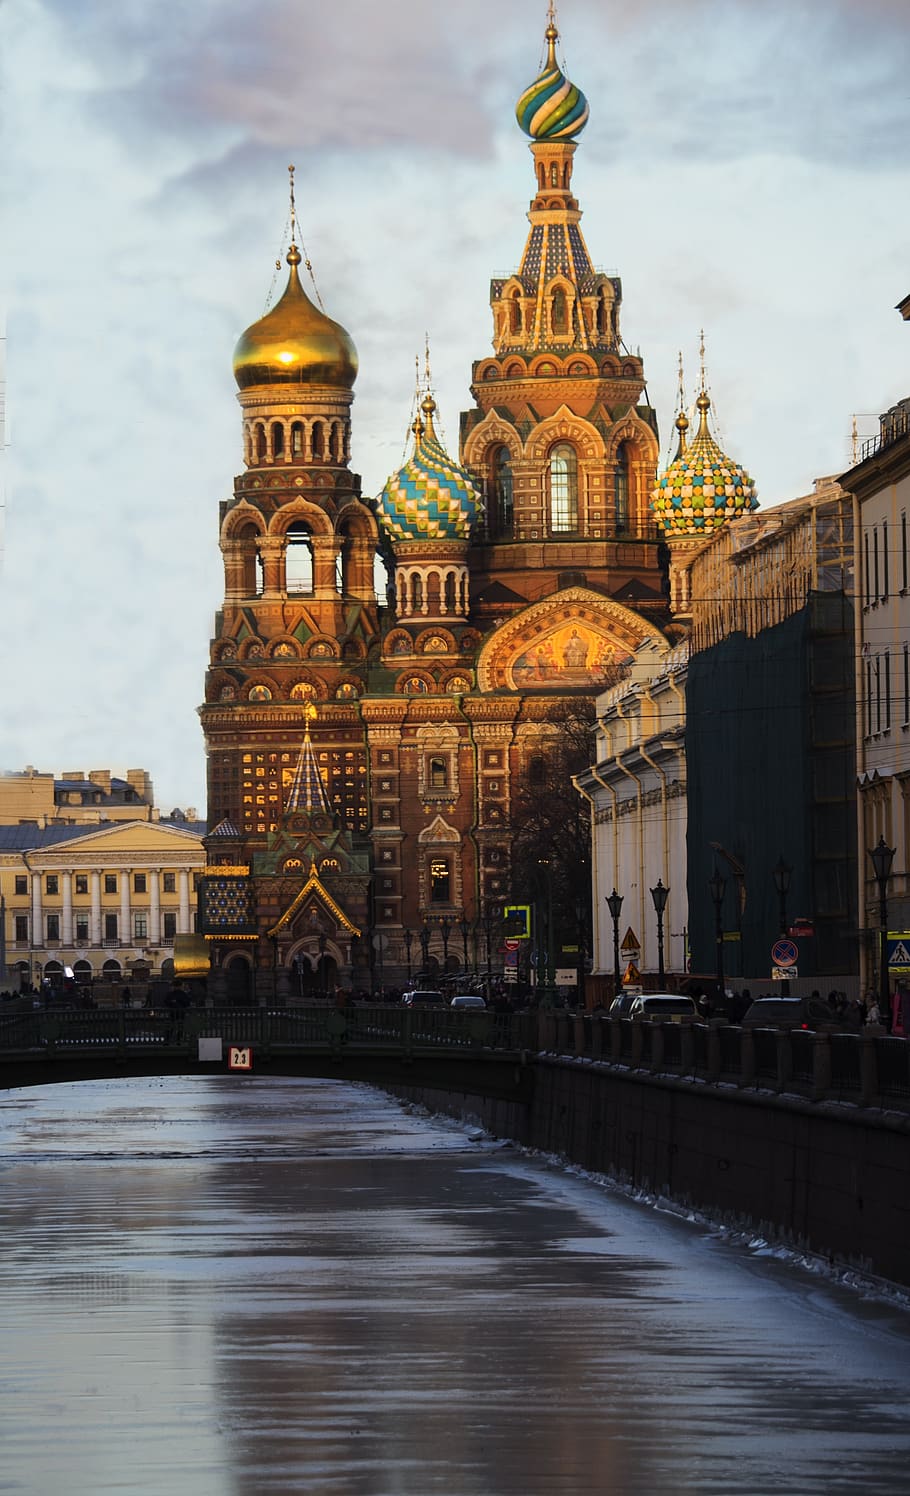 st petersburg russia, temple, tourism, postcard, building, church, museum, city, savior on spilled blood, historic architecture